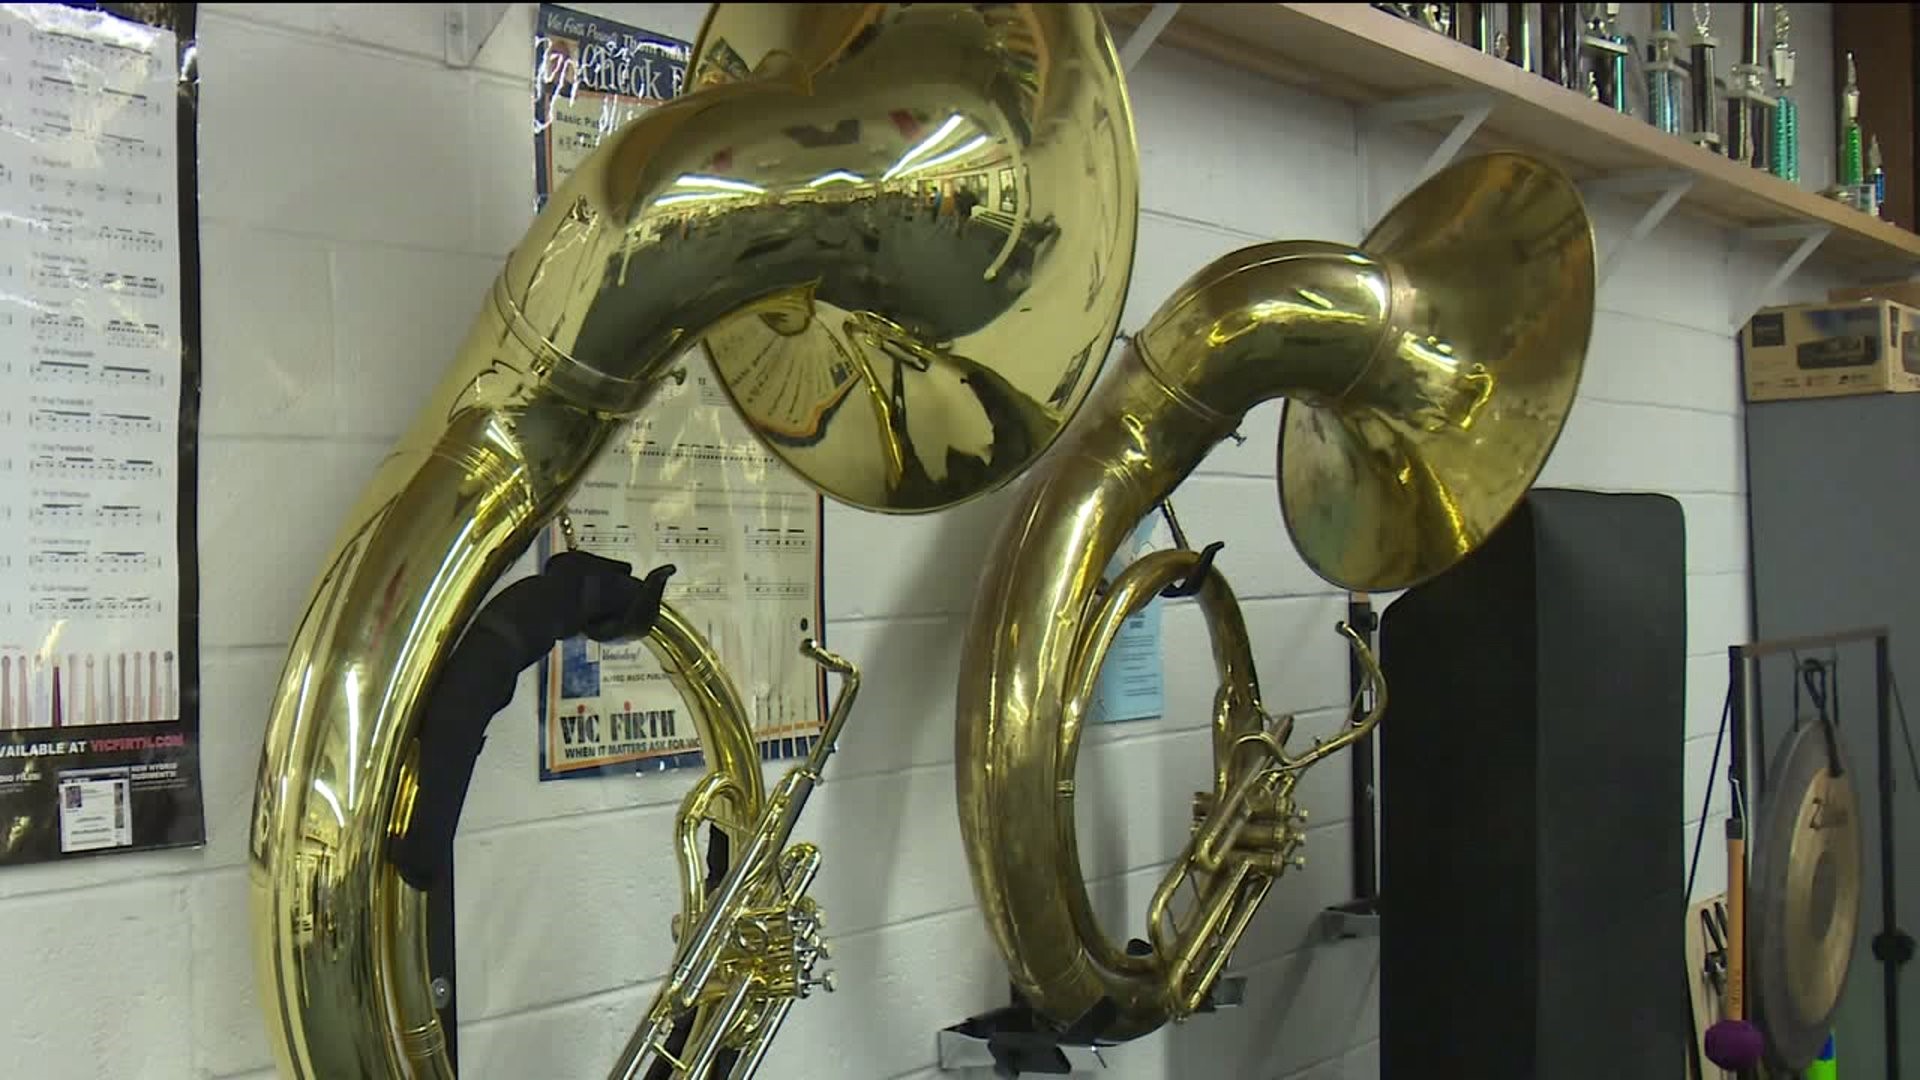 Band Returns Home After Theft of Instruments in Florida